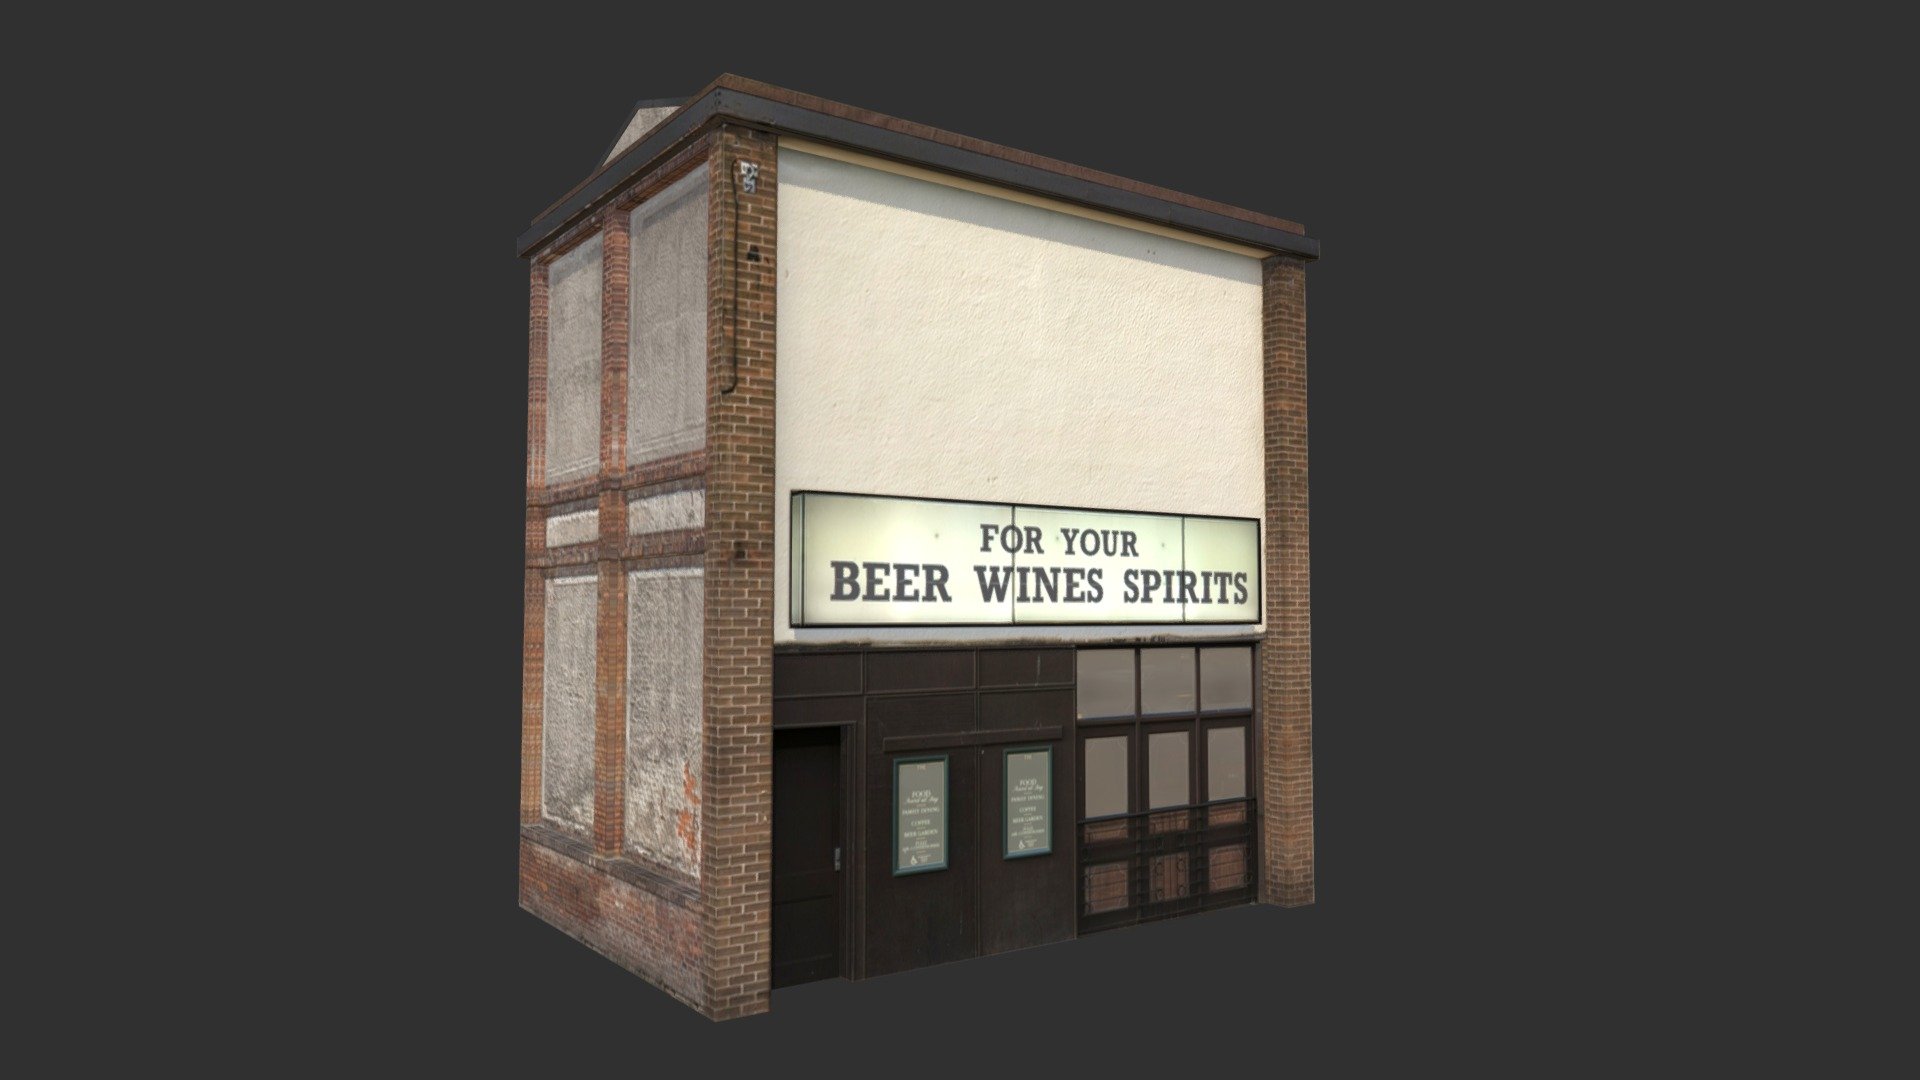 A 3D model of a low poly derelict building. Exterior only, no interior 3d model